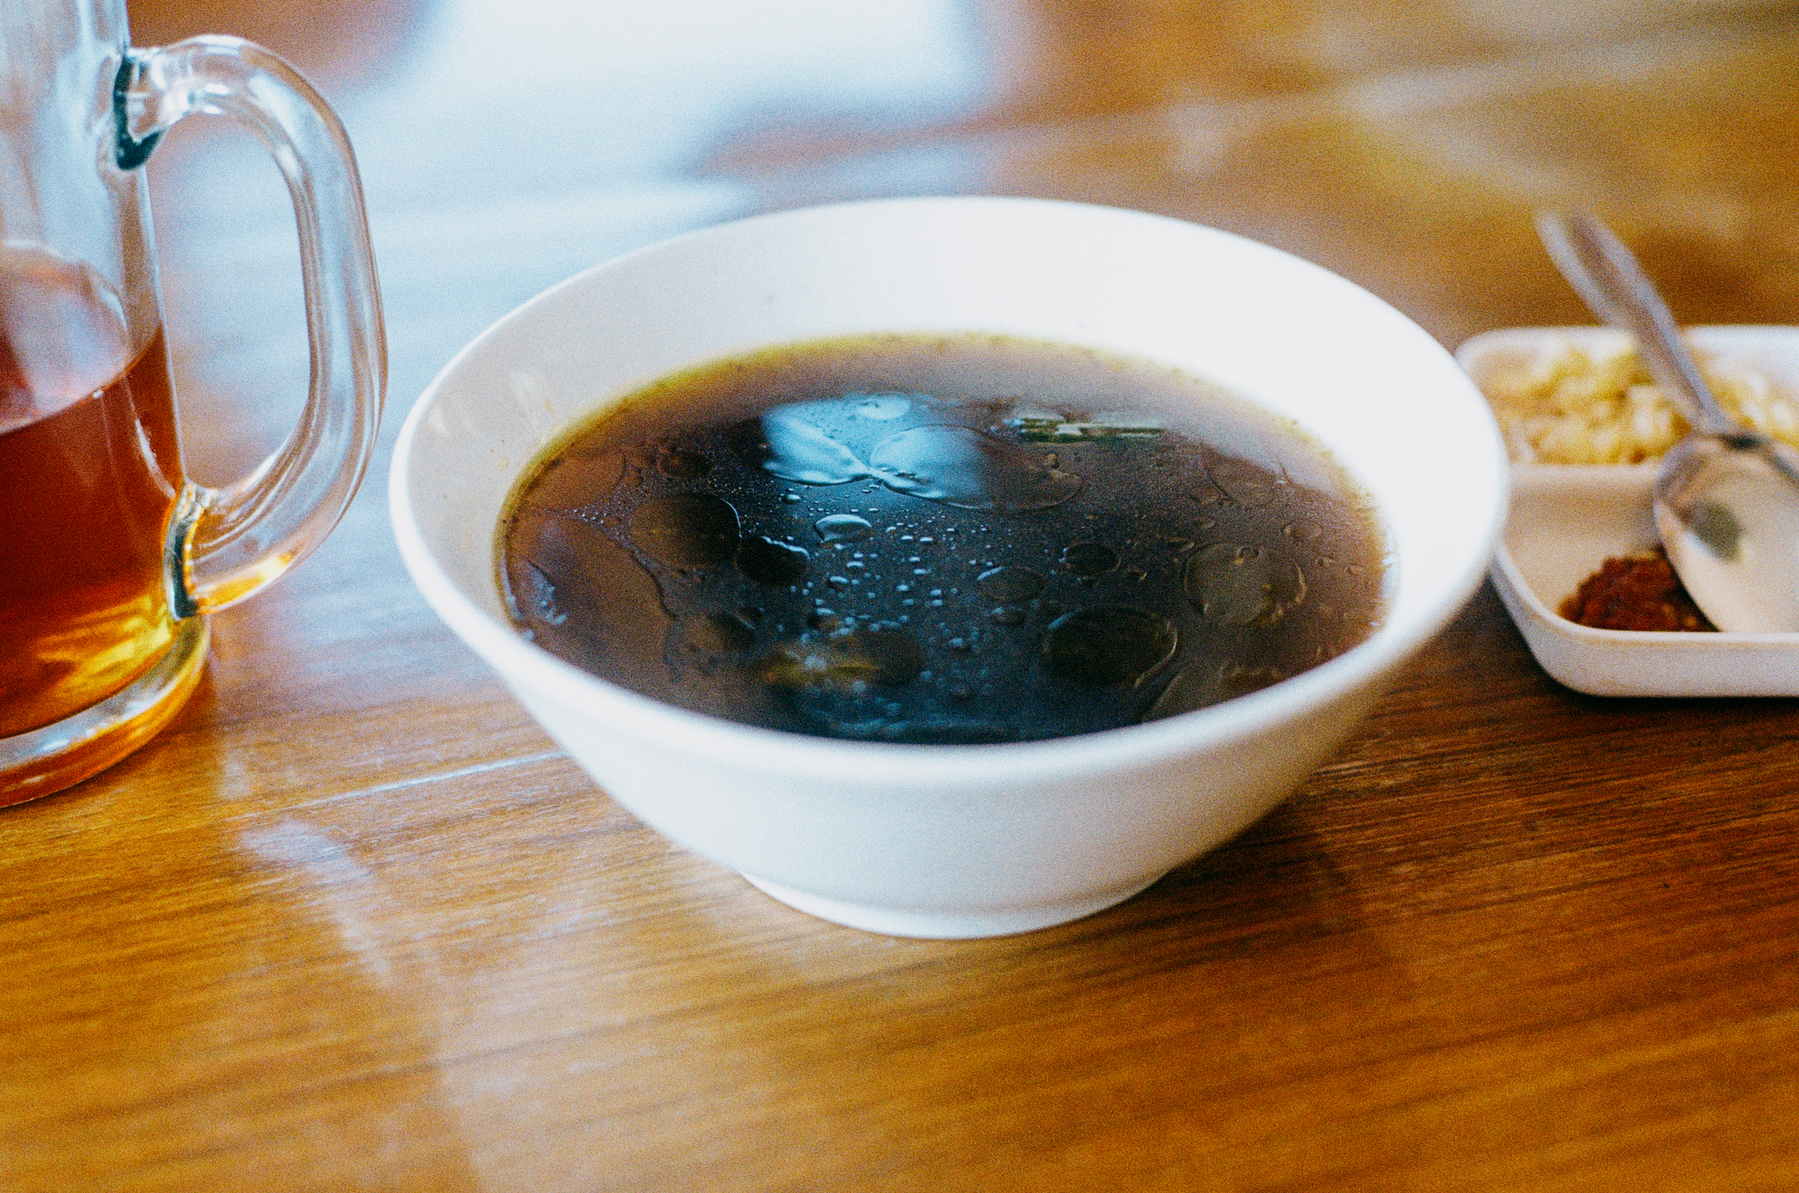 a scan of a color photo of rawon, an Indonesian beef soup, on a wooden table with tea